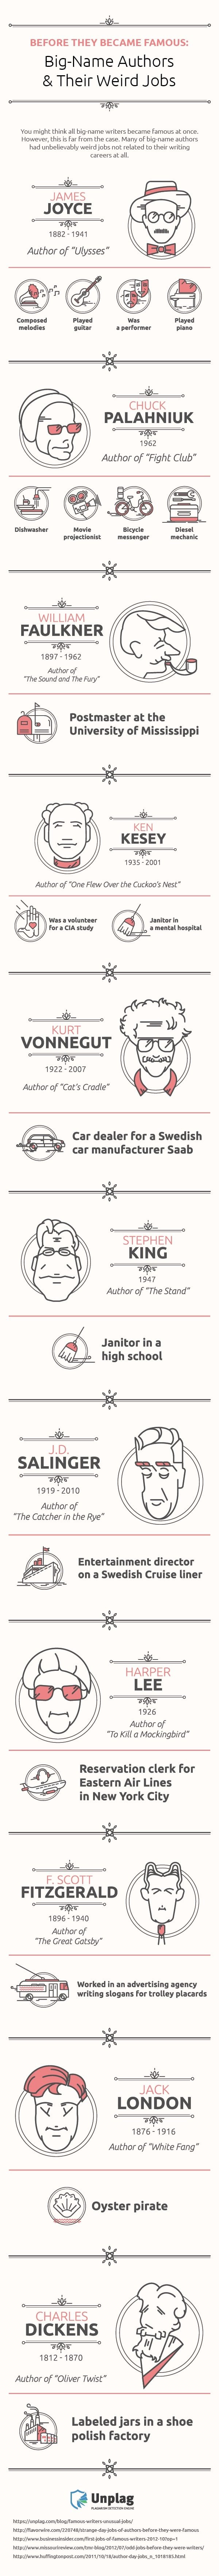 Weird-jobs-of-famous-writers-infographic